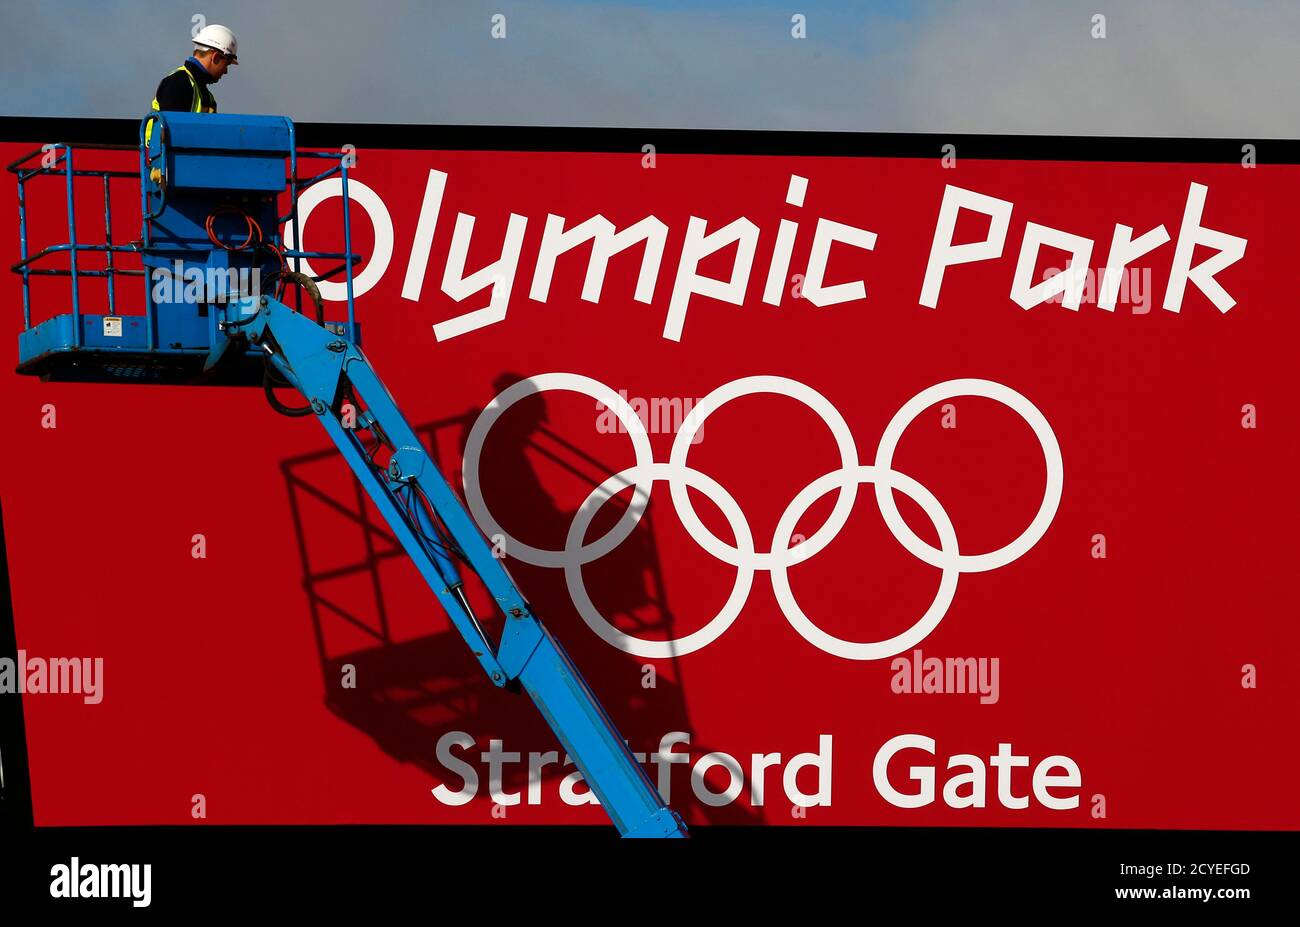 A worker adjusts his position on a cherry picker in front of one of the signs at the entrance to the Olympic Park, Stratford, east London, July 19, 2012. The 2012 London Olympic Games will begin in just over a week.  REUTERS/Andrew Winning (BRITAIN - Tags: SPORT OLYMPICS) Stock Photo